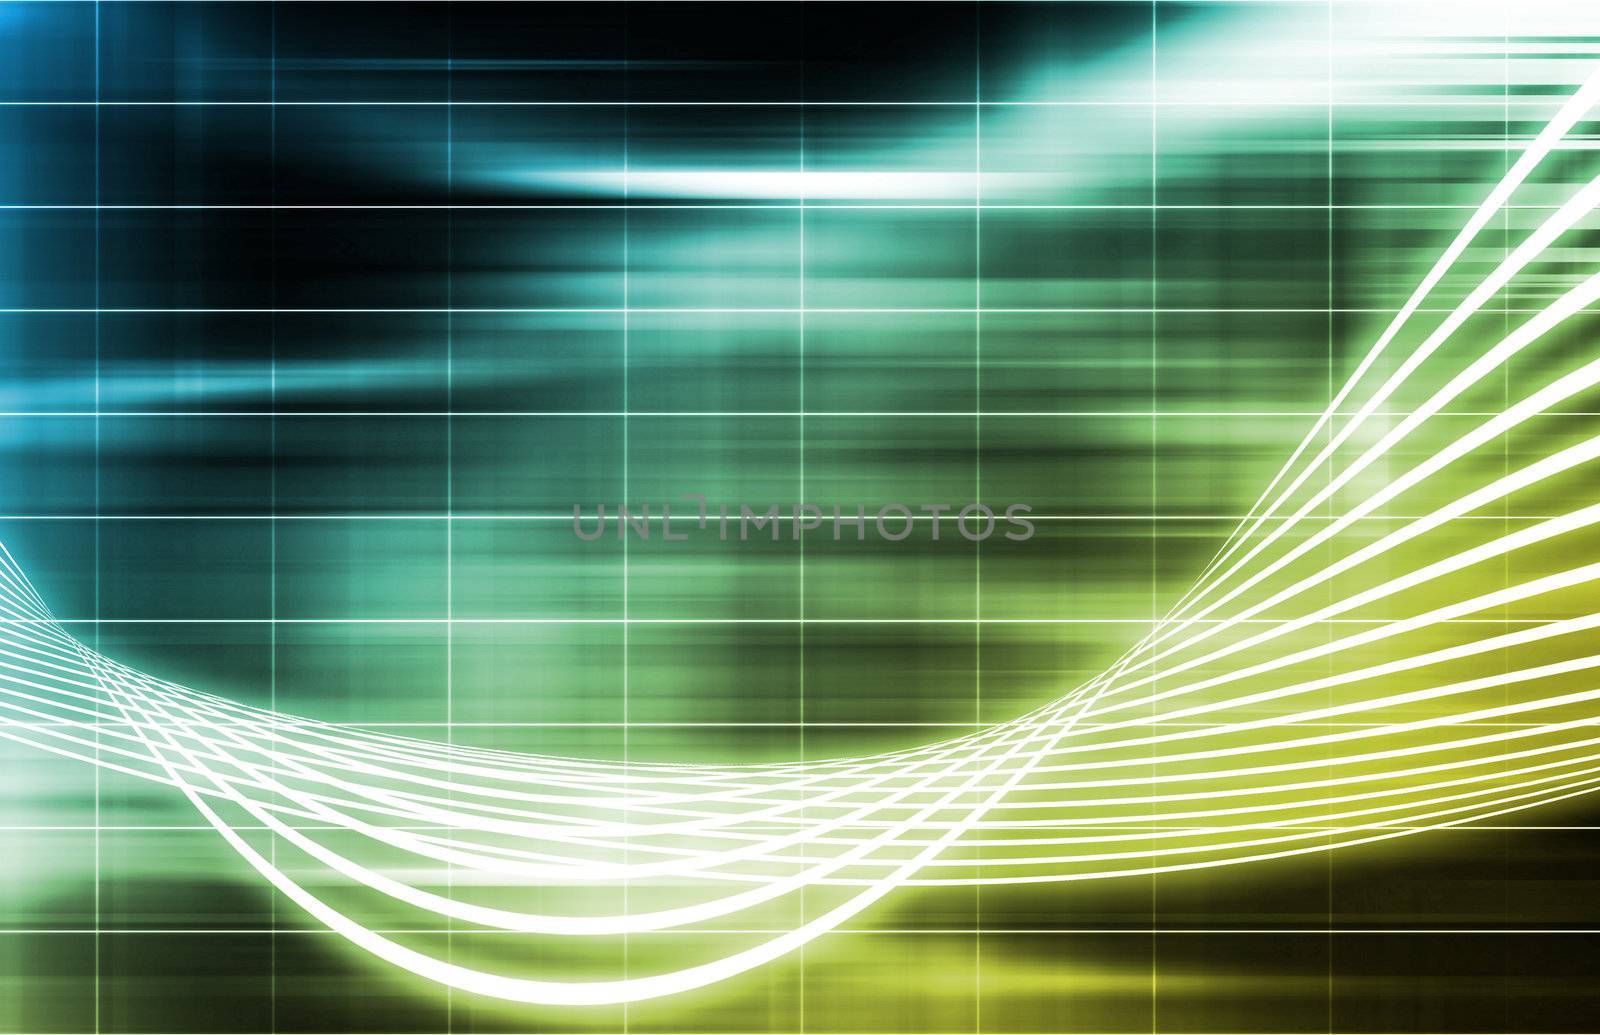 A Futuristic Technology Background With Wild Lines